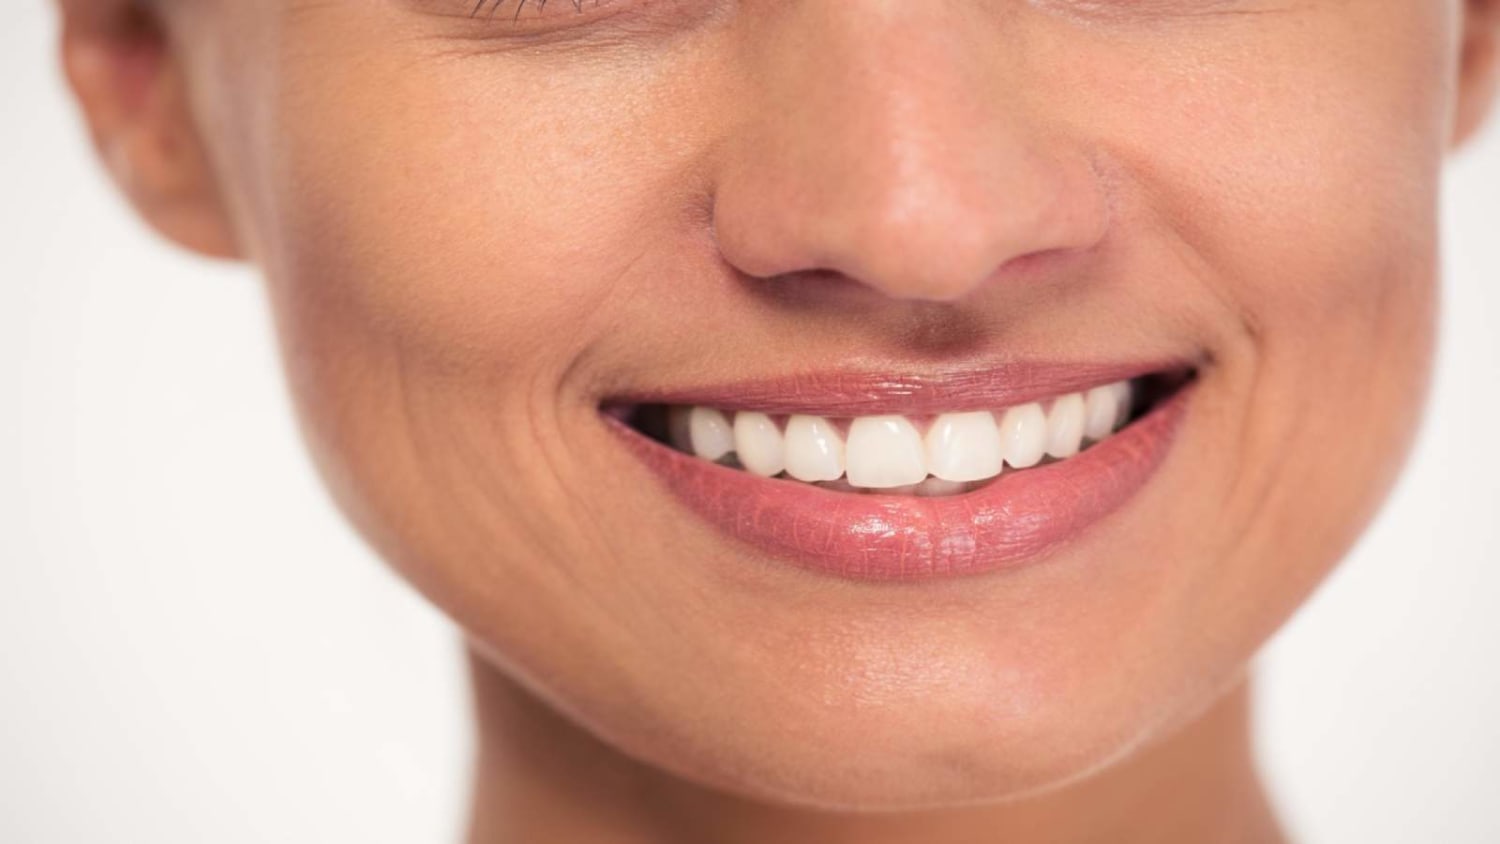 5 ways dental implants can change your life